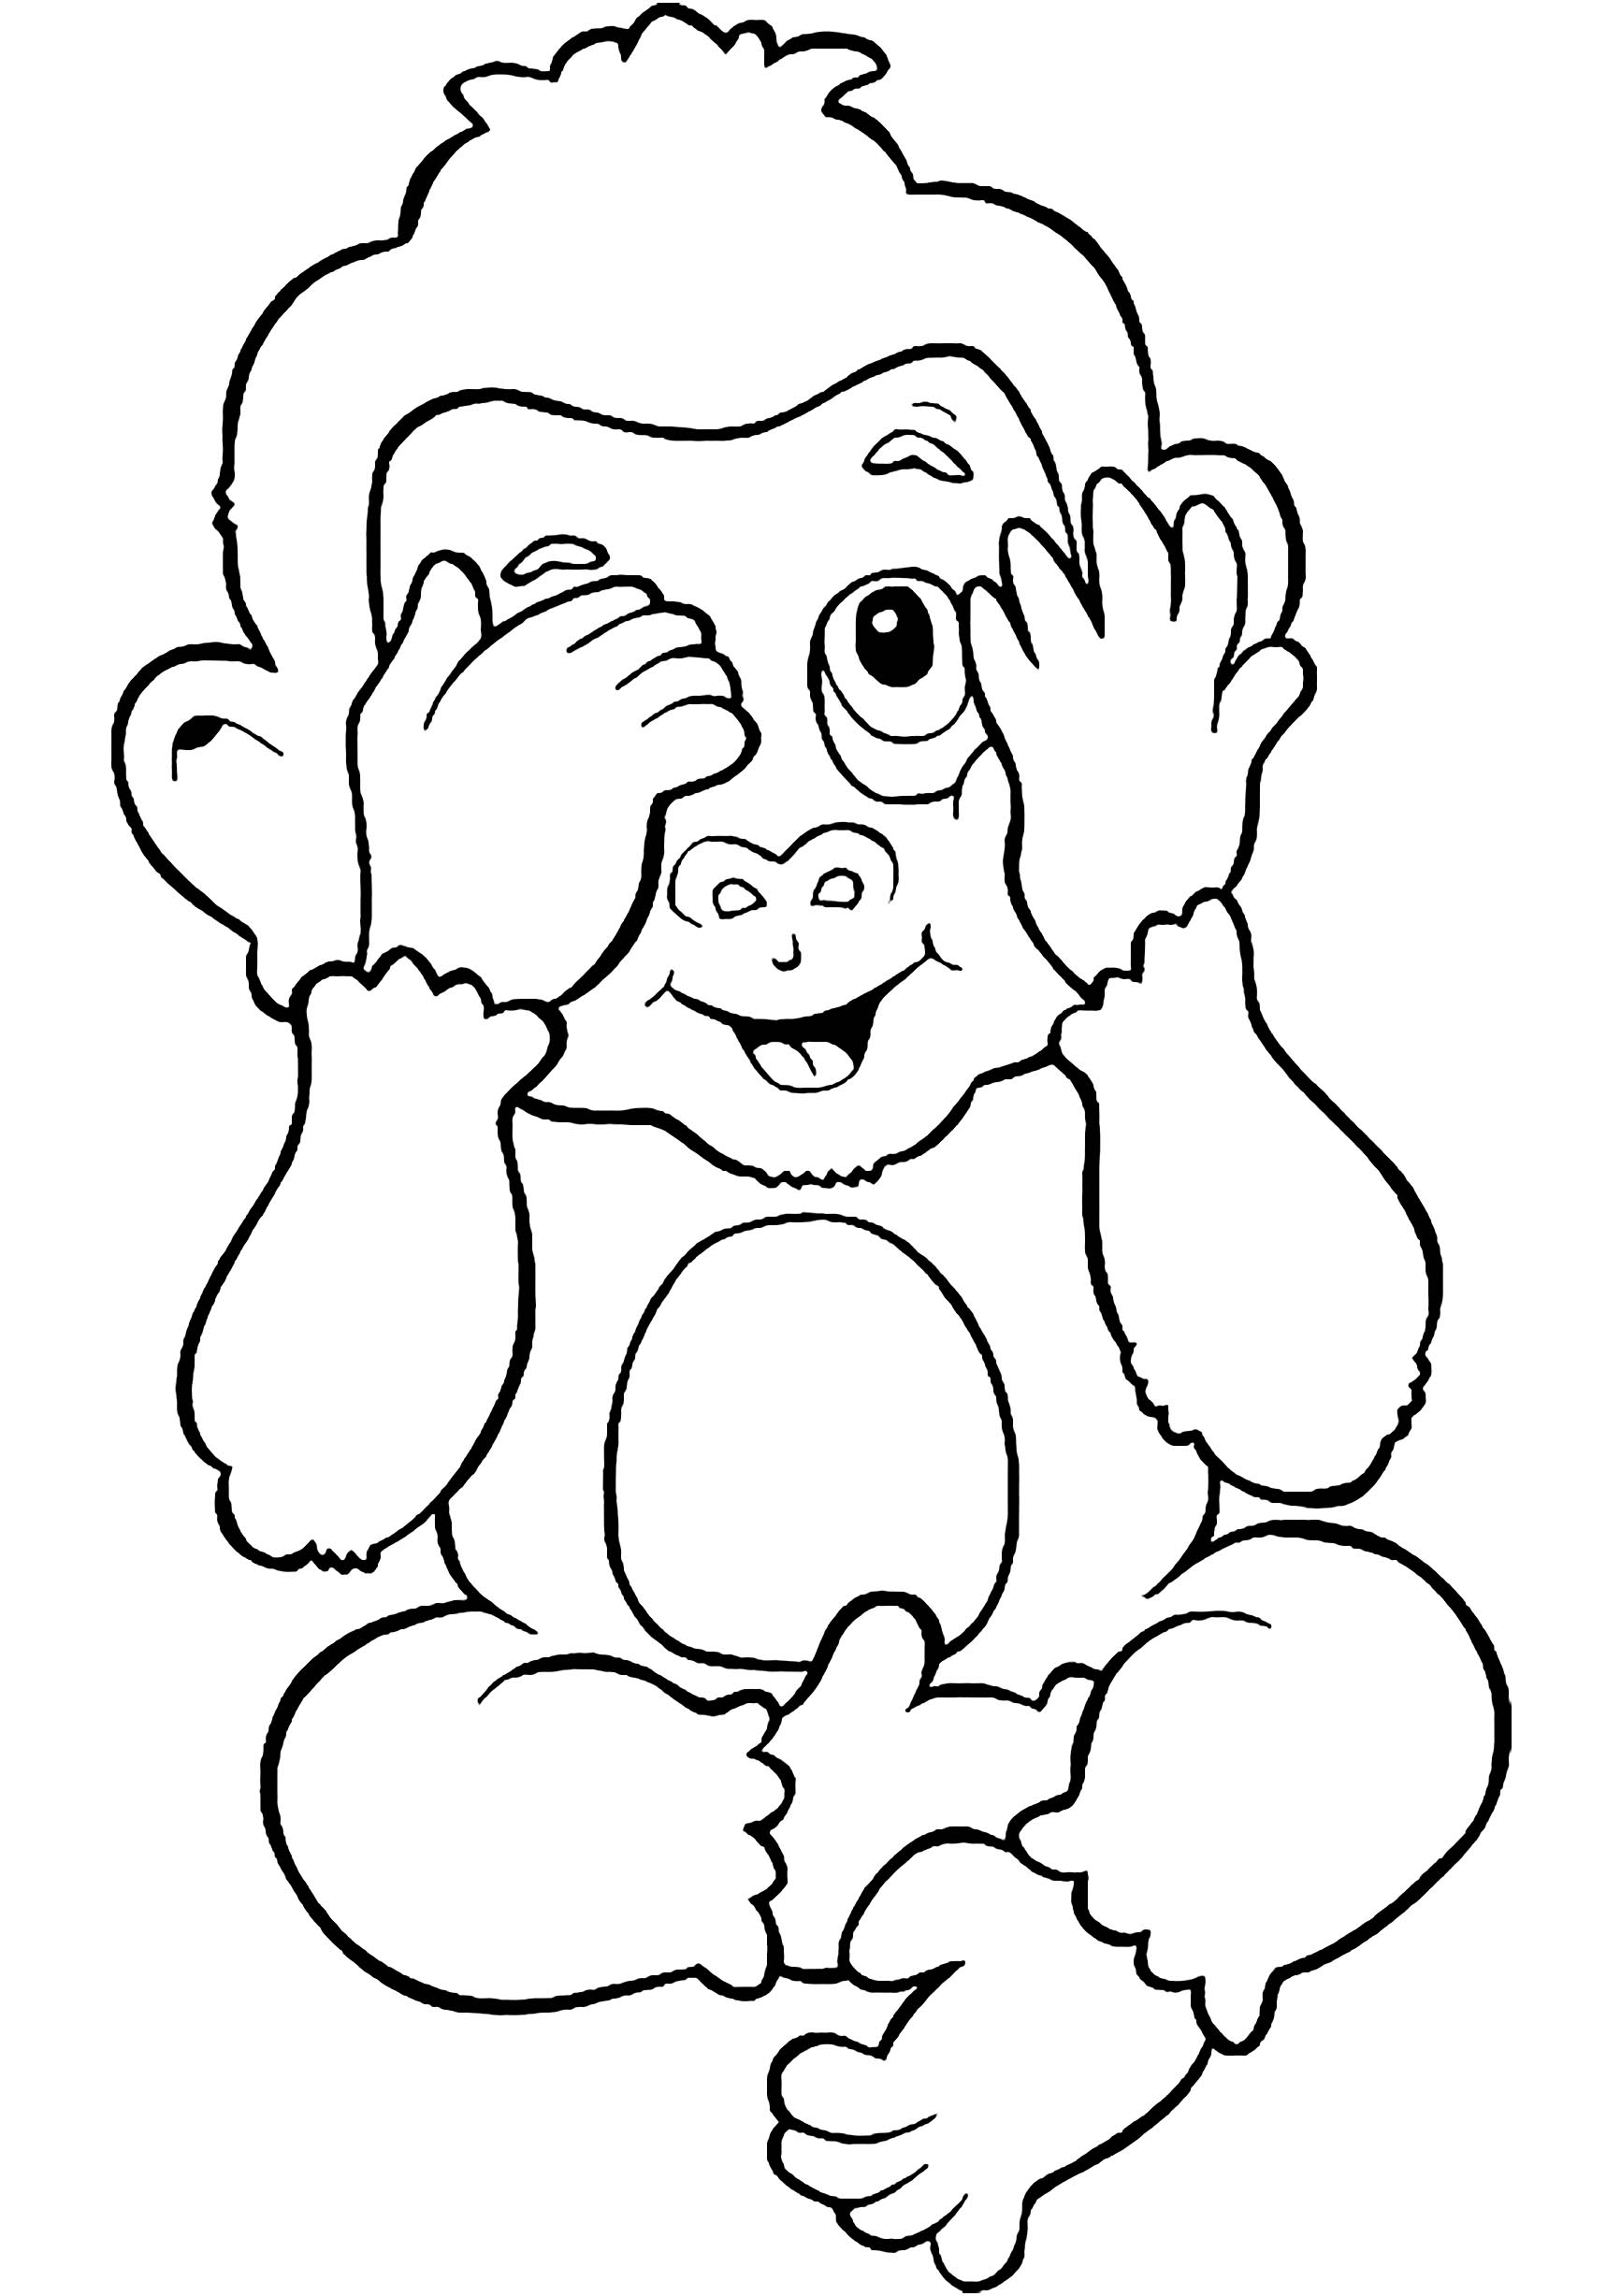 Simple Monkeys coloring page to print and color for free